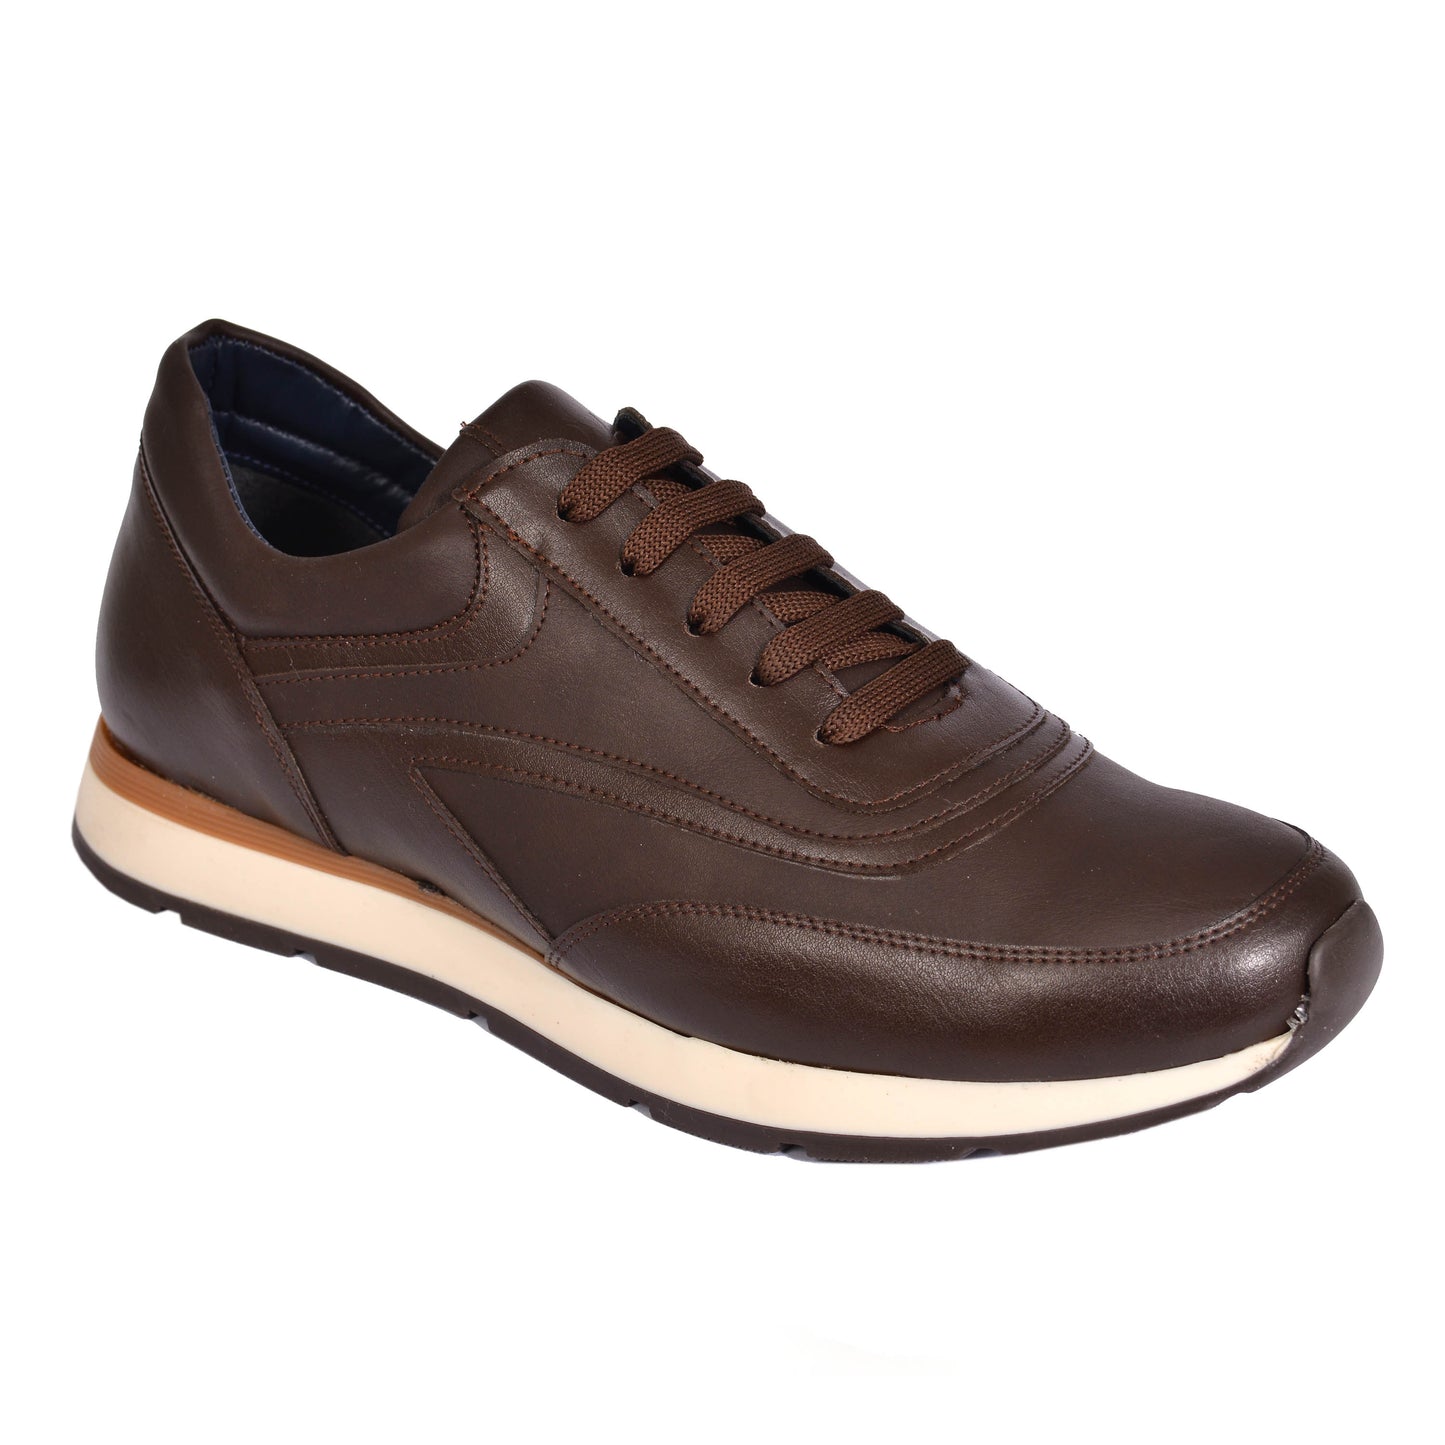 2H #9502 Brown Casual Shoes